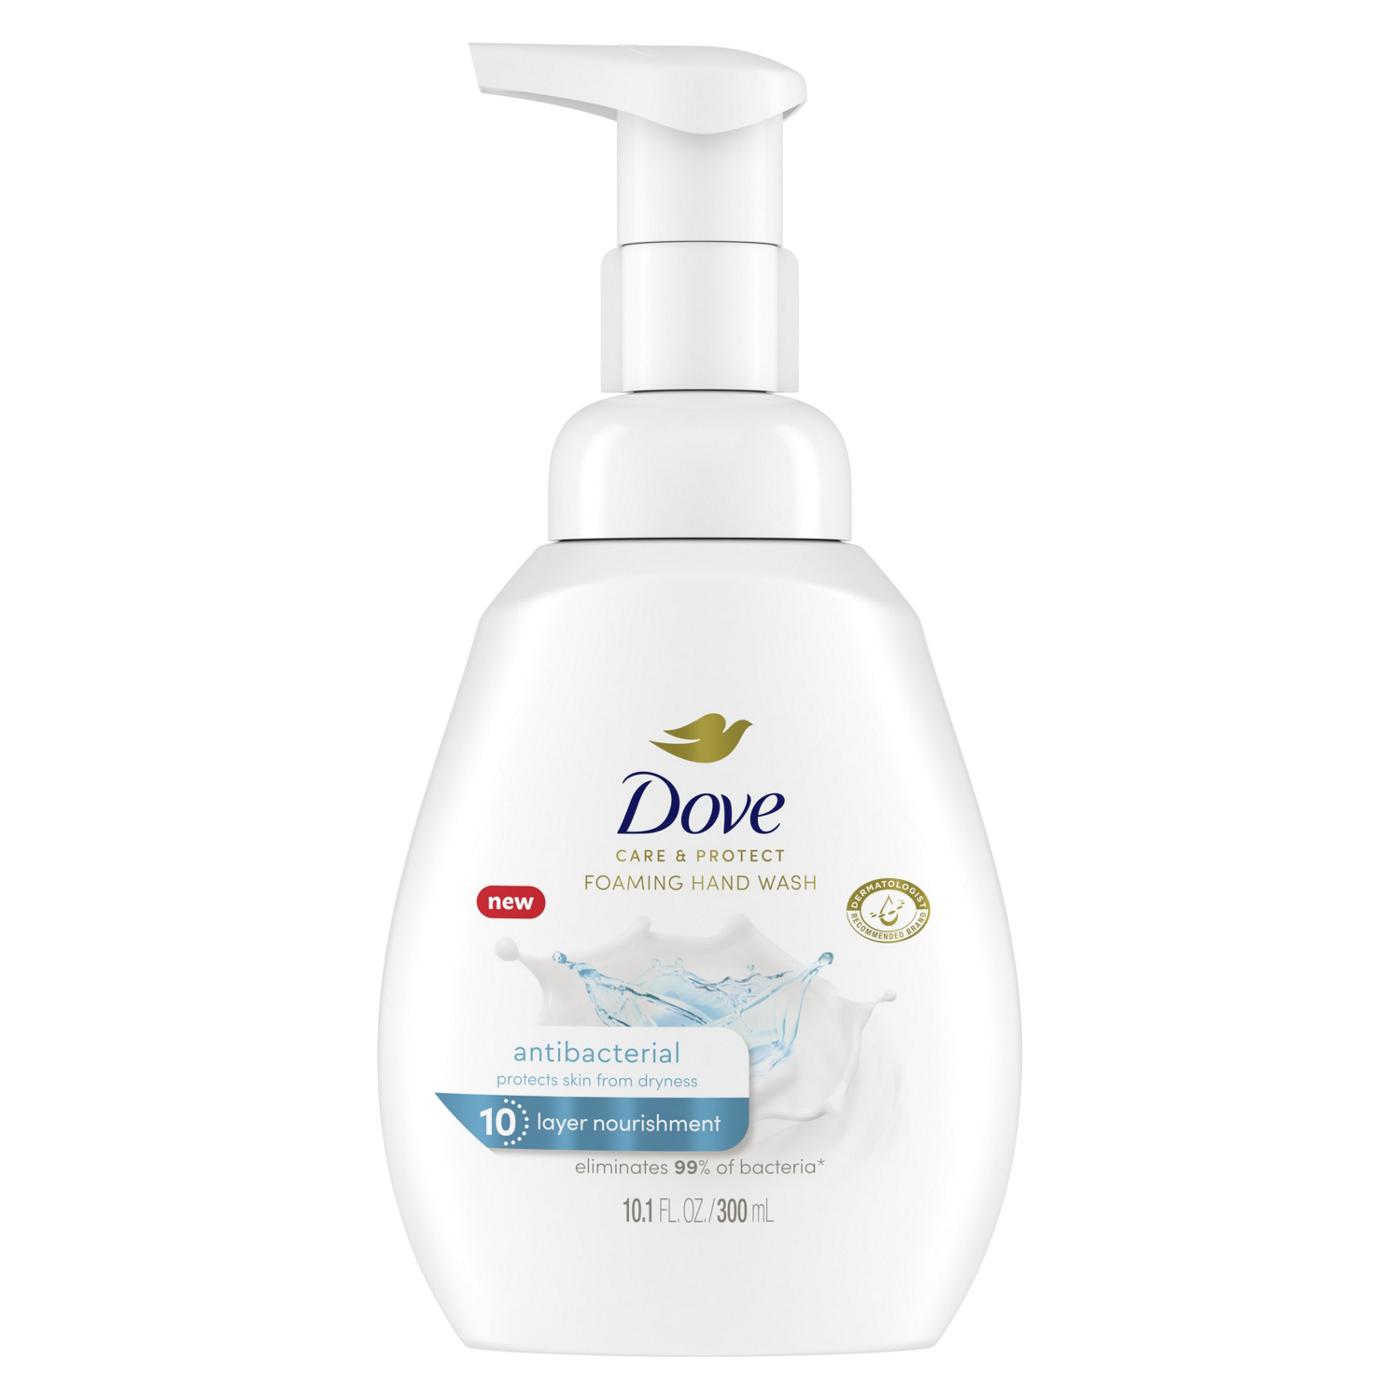 Dove Care & Protect Foaming Hand Wash; image 1 of 10